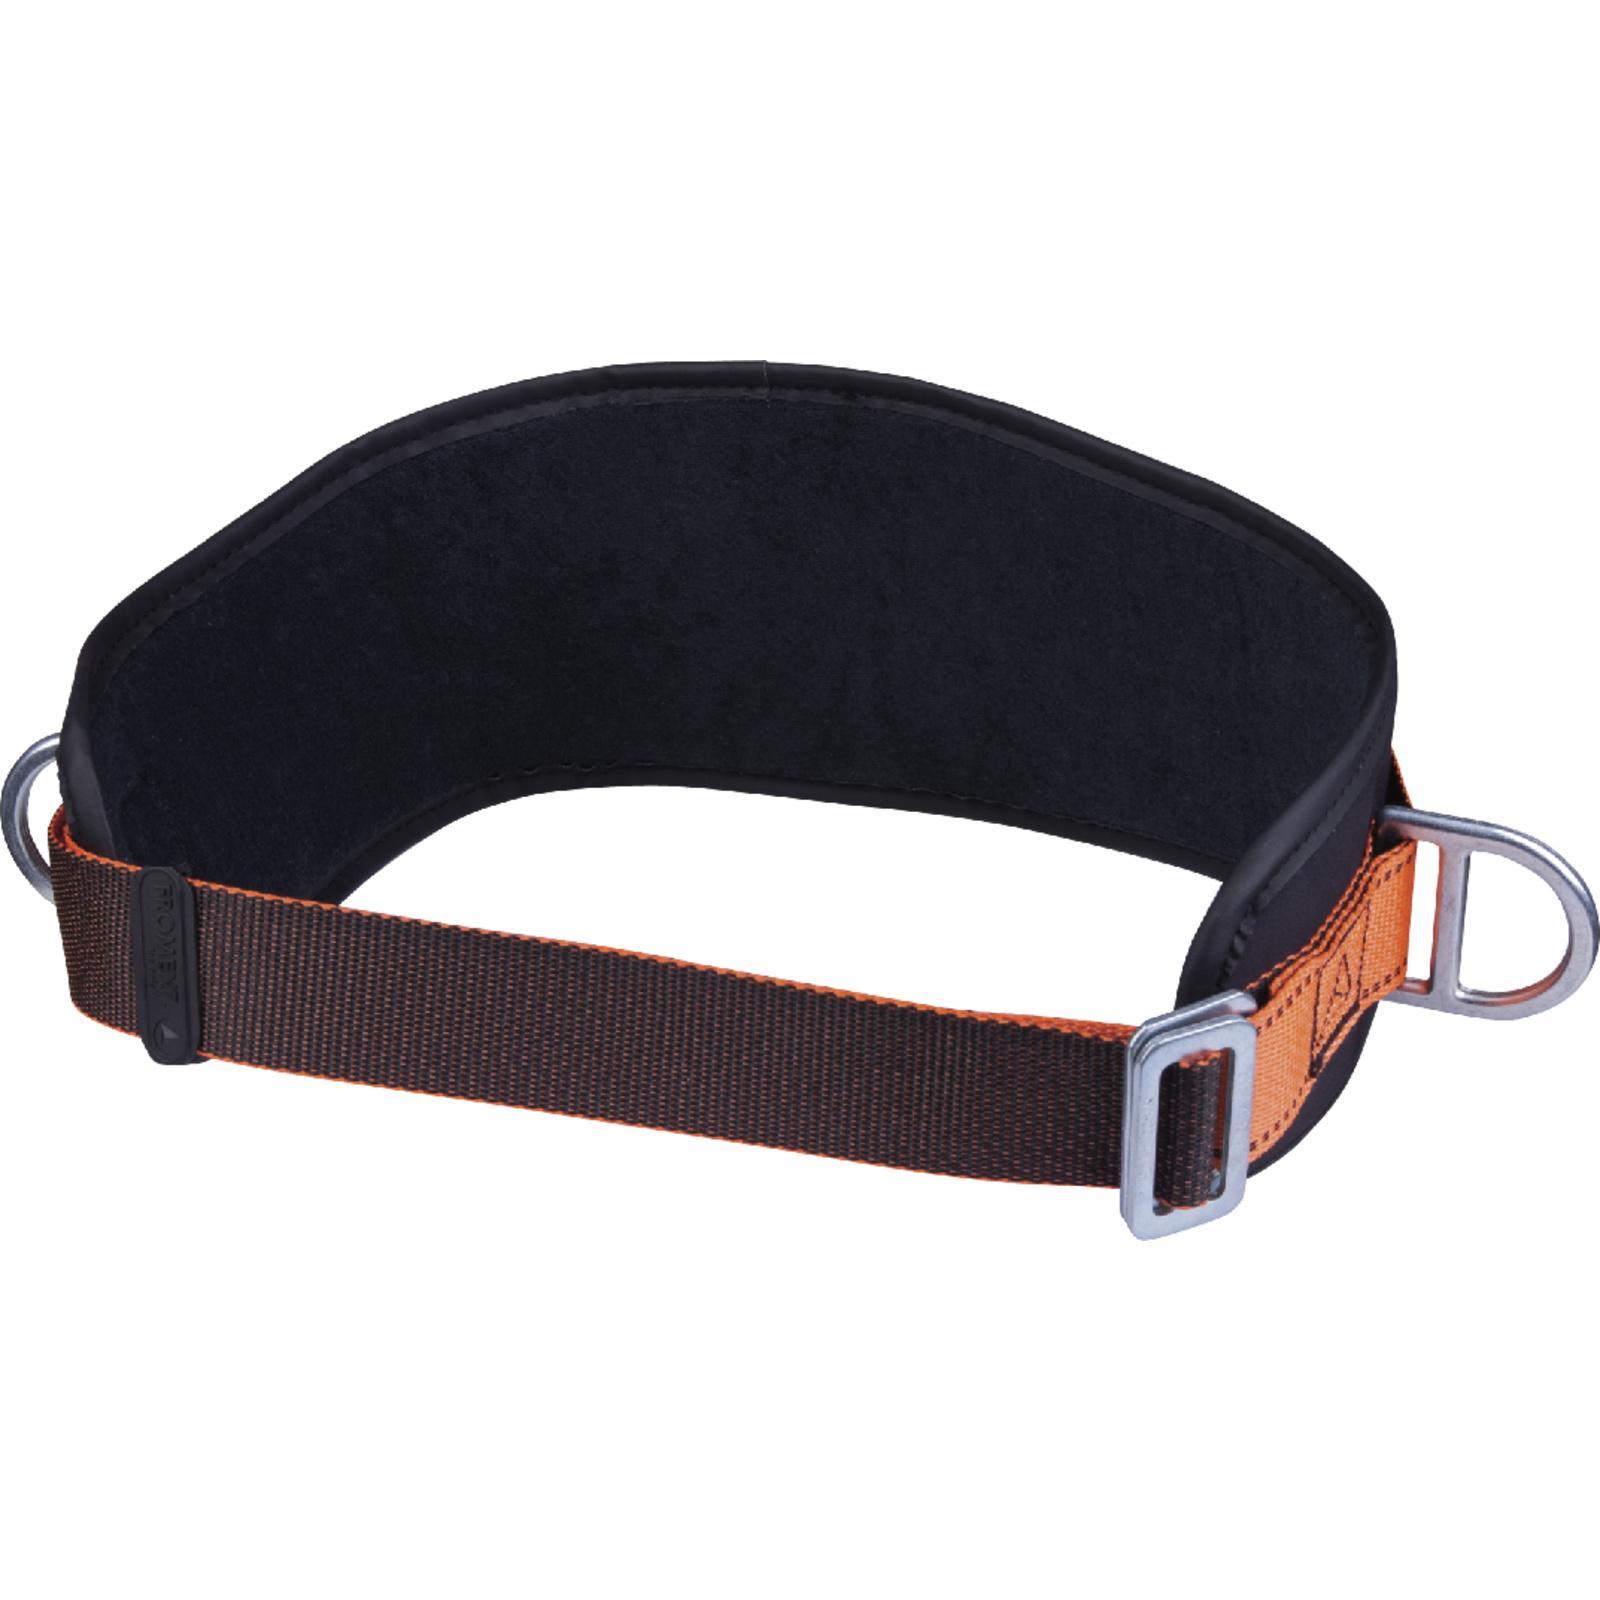 DELTA PLUS Positioning Belt with Thermoformed Back - Safetyware Sdn Bhd